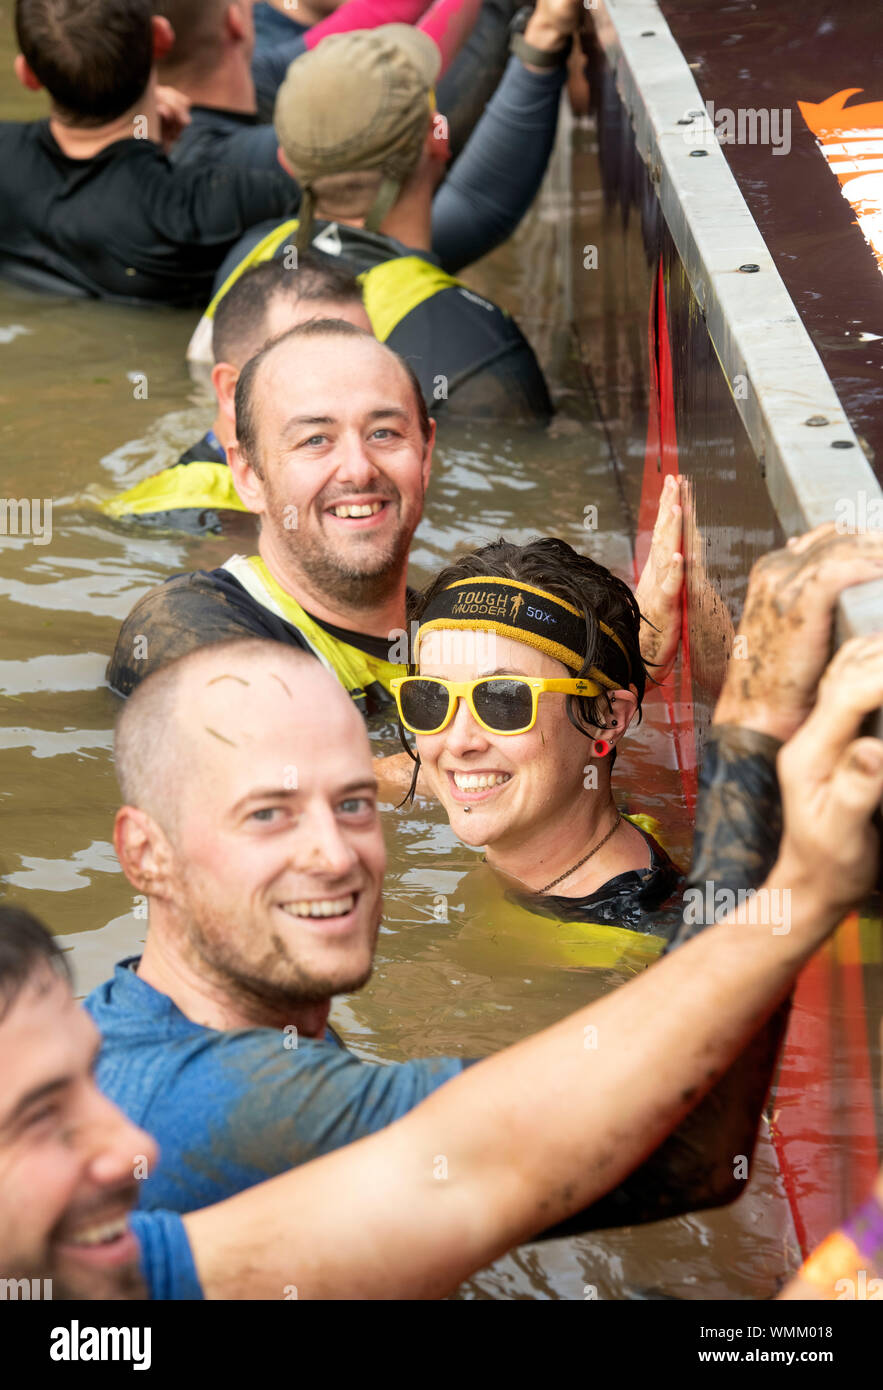 Contestants in the ‘Block Ness Monster’ obstacle at the Tough Mudder endurance event in Badminton Park, Gloucestershire UK Stock Photo